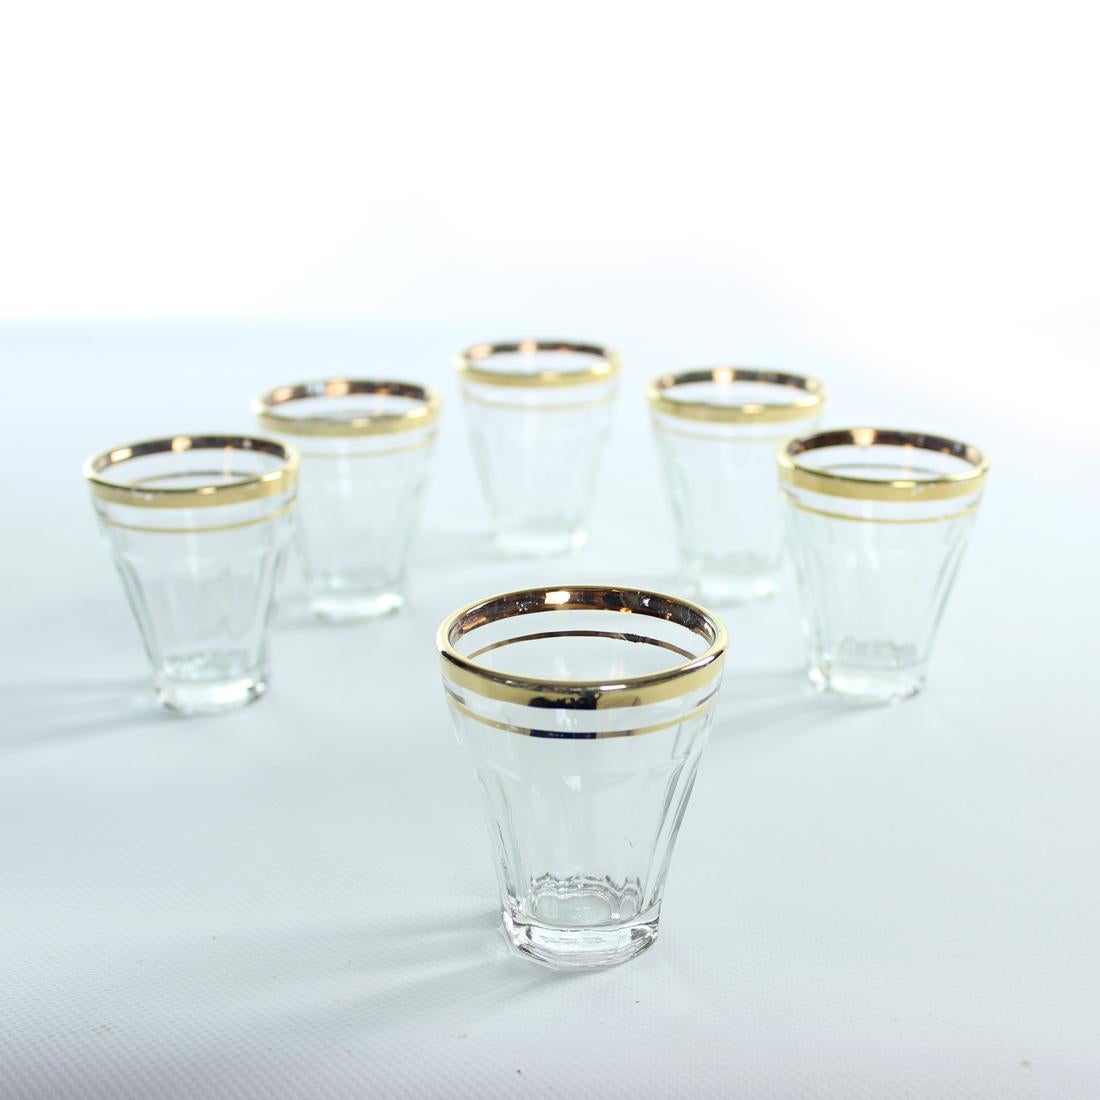 Vintage Drinking Glasses With Gold Rim, Set Of 6, Czechoslovakia 1960s In Good Condition For Sale In Zohor, SK